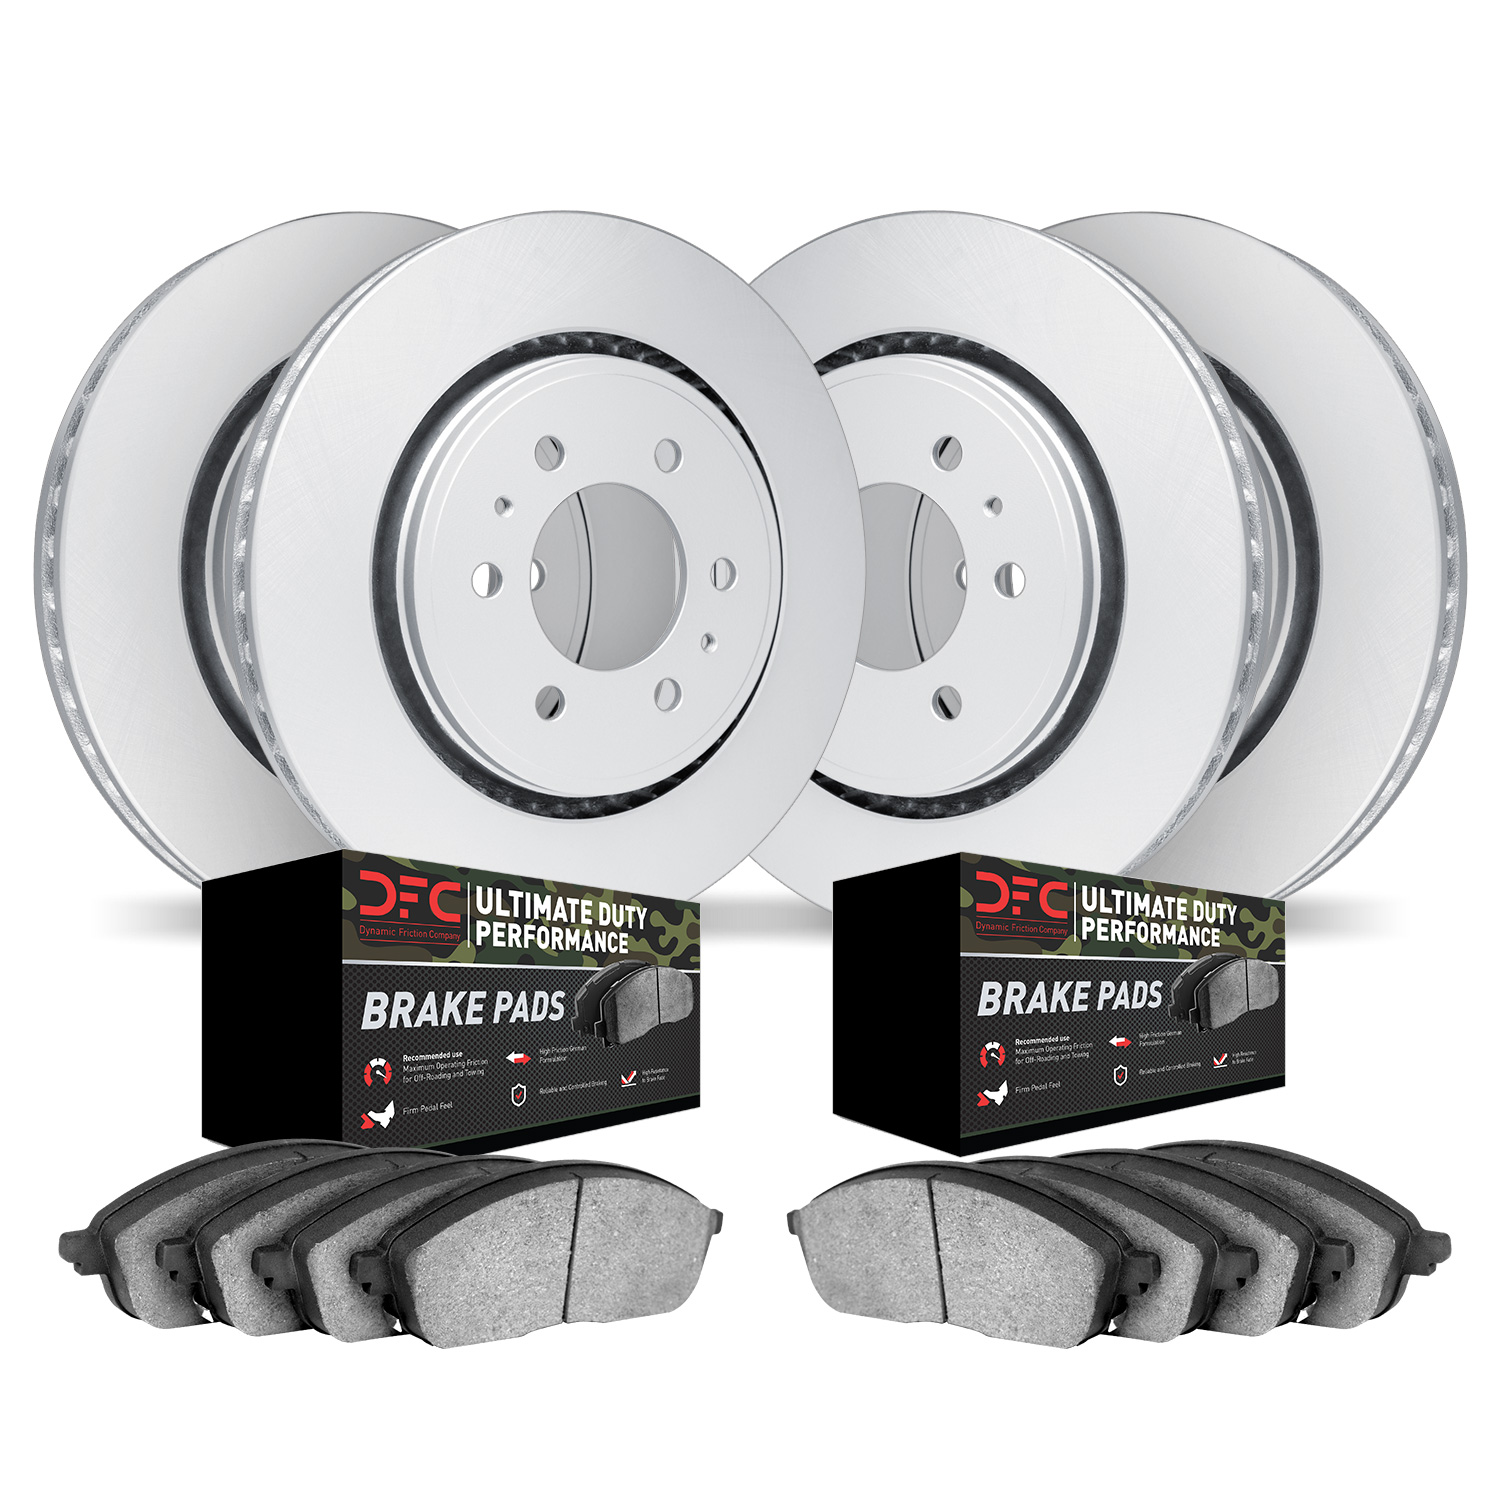 4404-76008 Geospec Brake Rotors with Ultimate-Duty Brake Pads Kit, Fits Select Lexus/Toyota/Scion, Position: Front and Rear